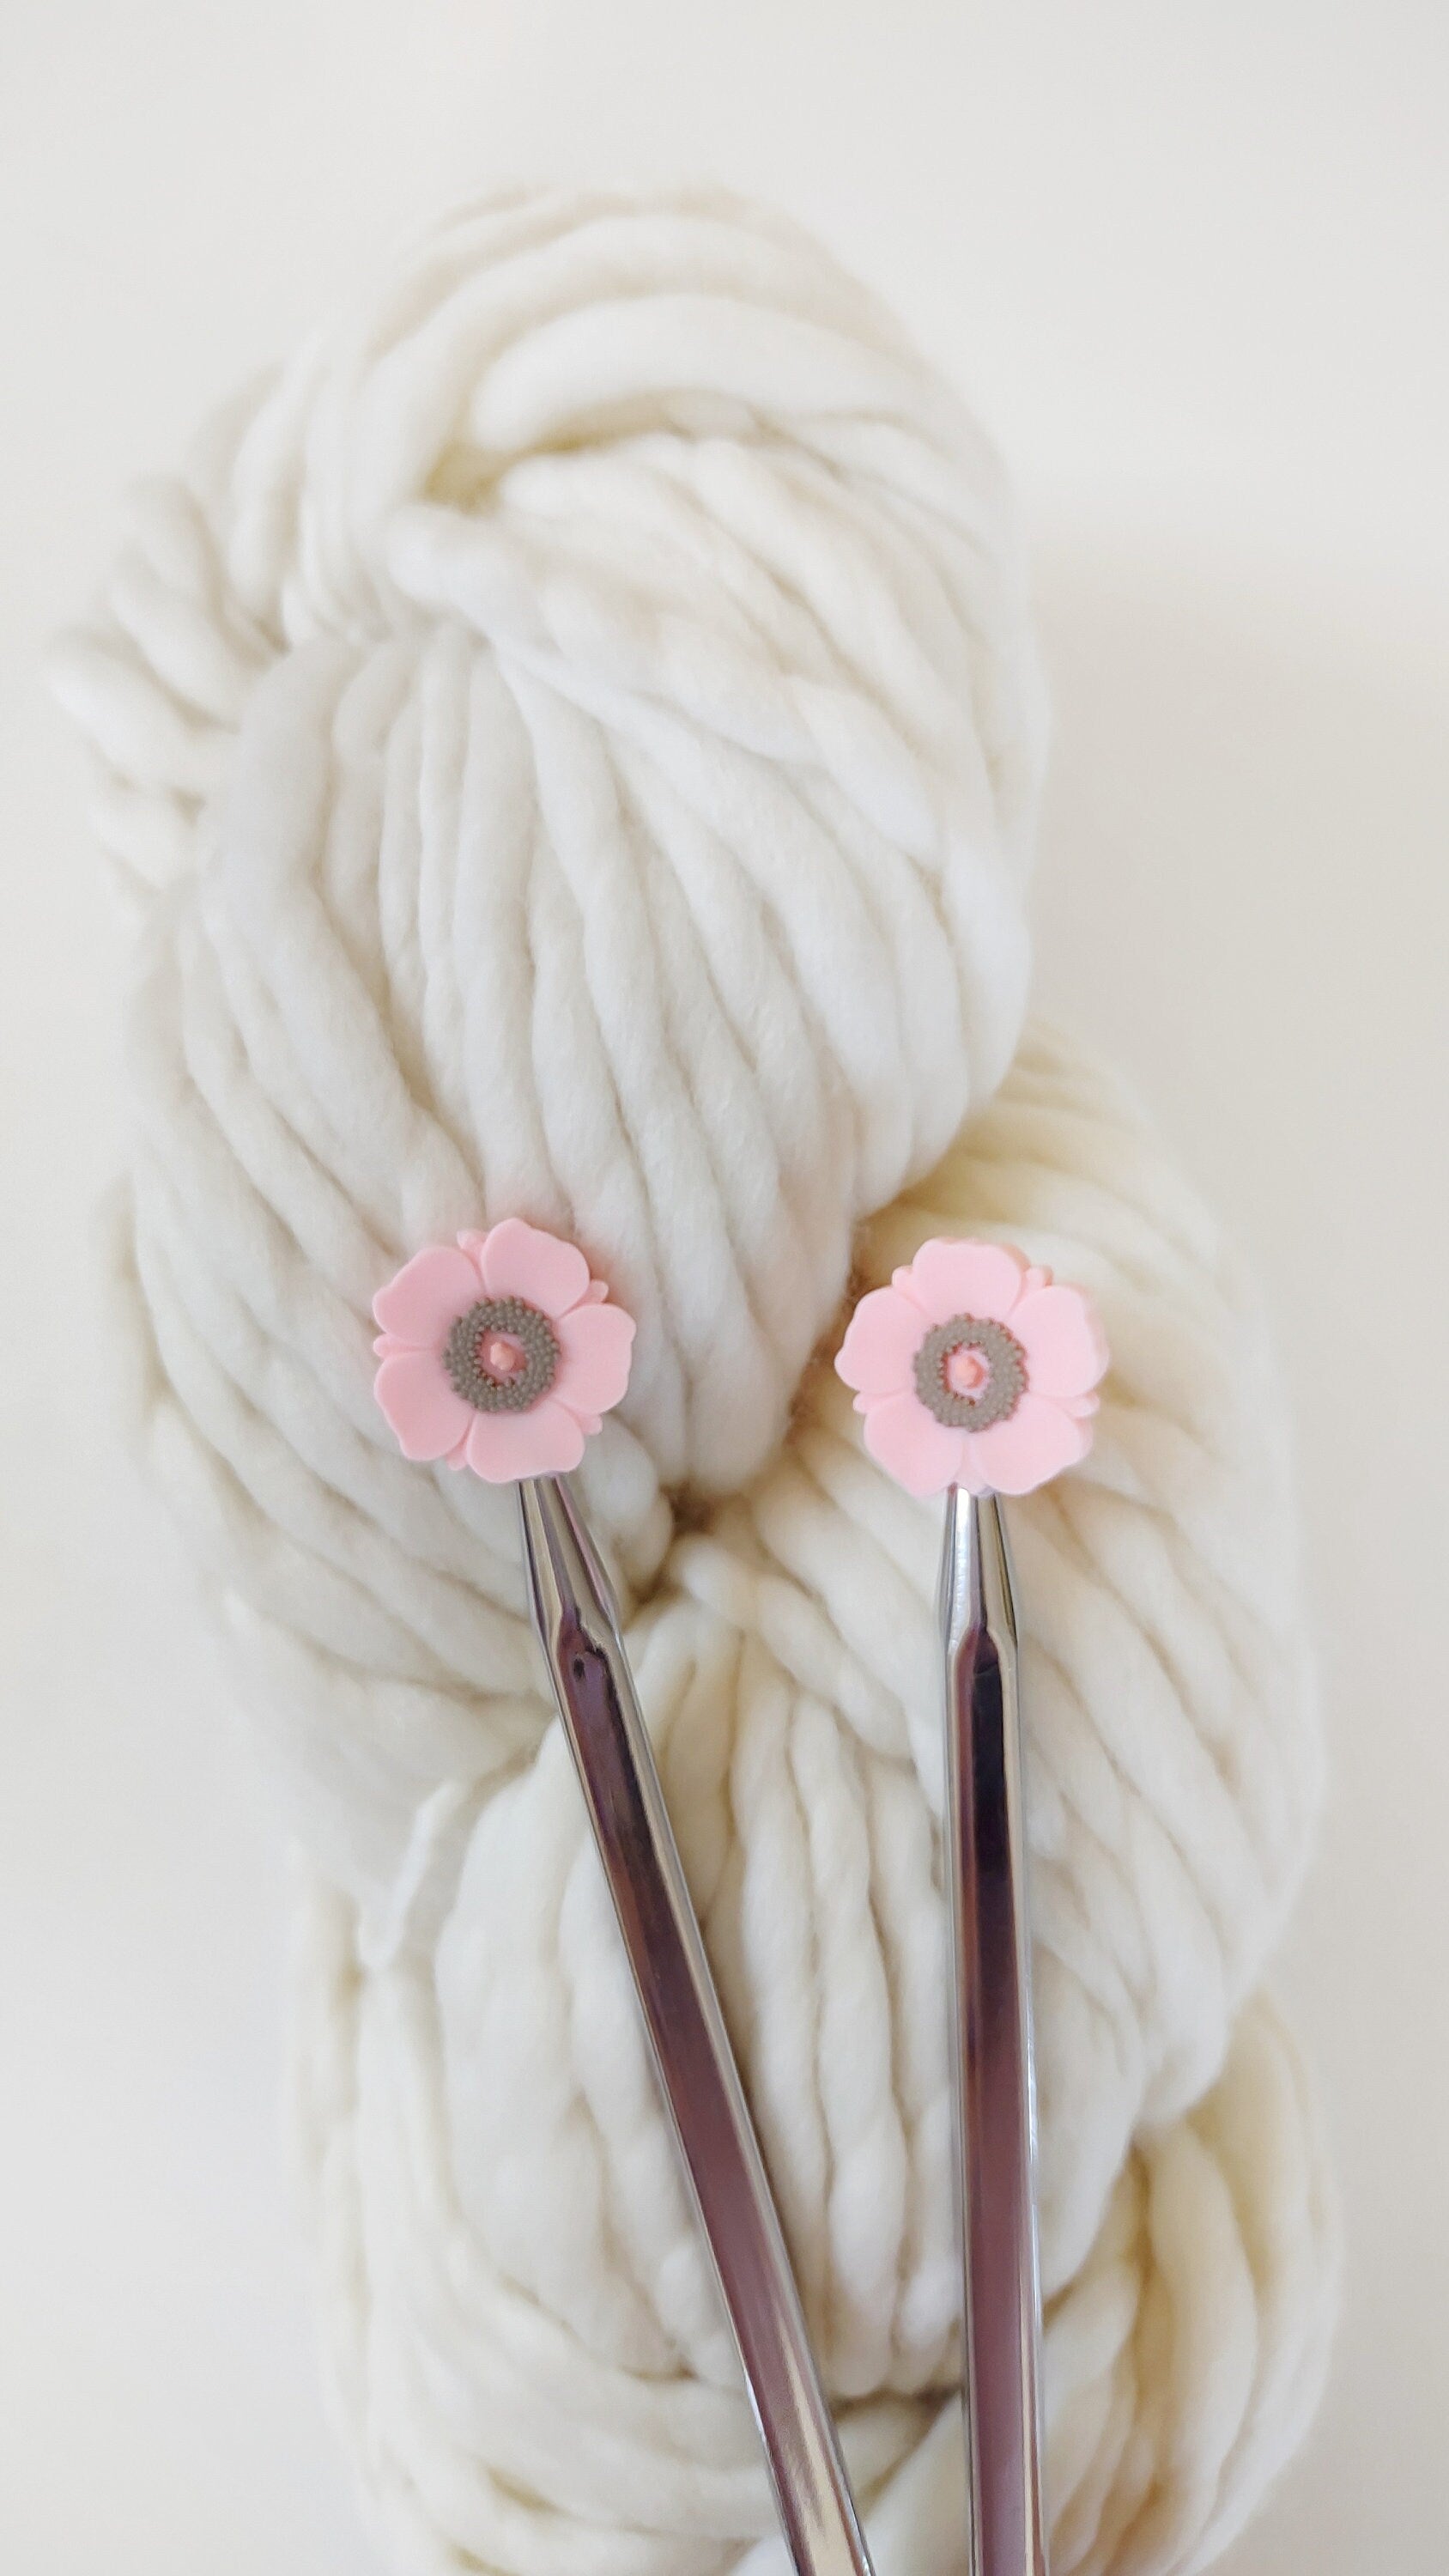 Light Pink Poppy Flower knitting Needle Stitch Stoppers. Needle Protector. Knitting Needle Stoppers. Notions, Accessories, Supplies, Tools.